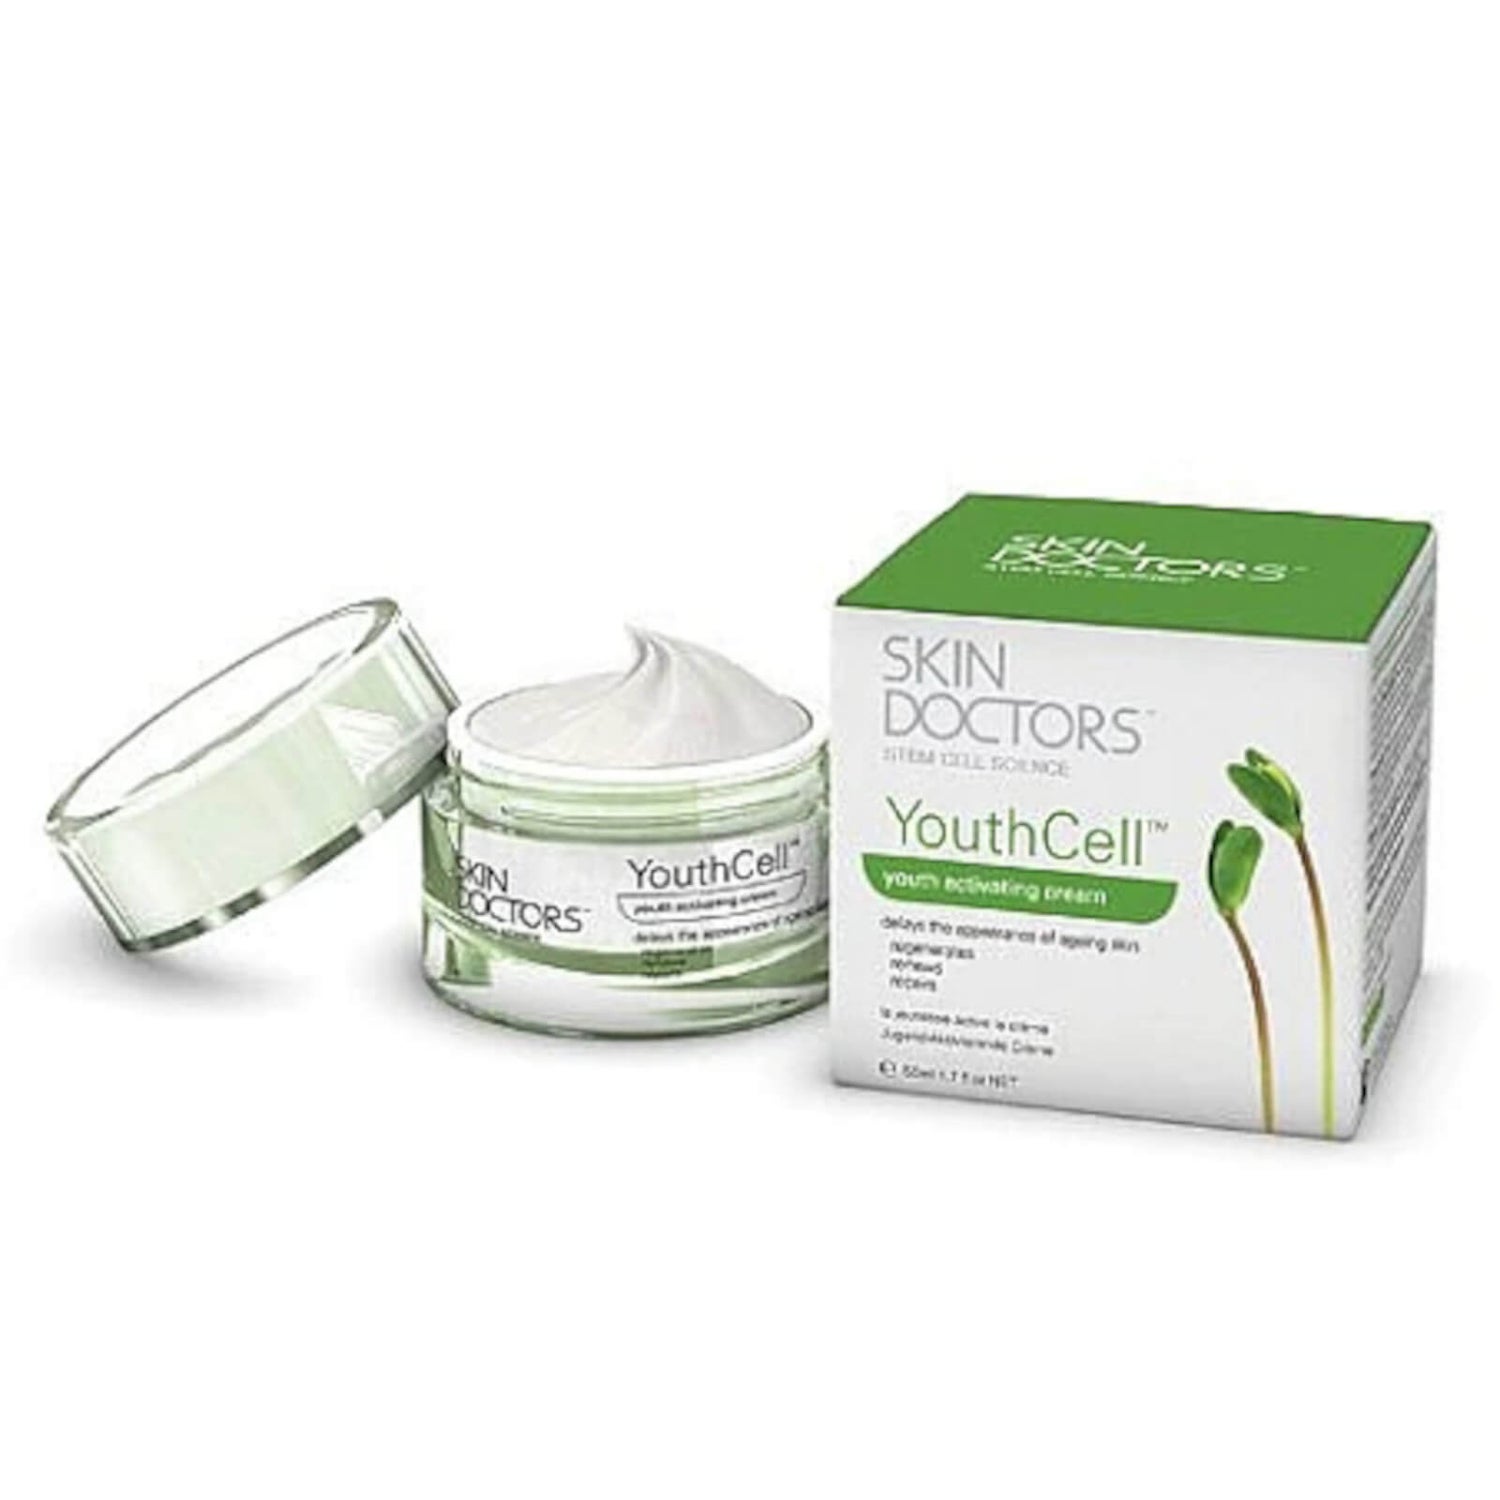 SKIN DOCTORS YOUTHCELL YOUTH ACTIVATING CREAM (Anti-Aging Pflege) 50ml